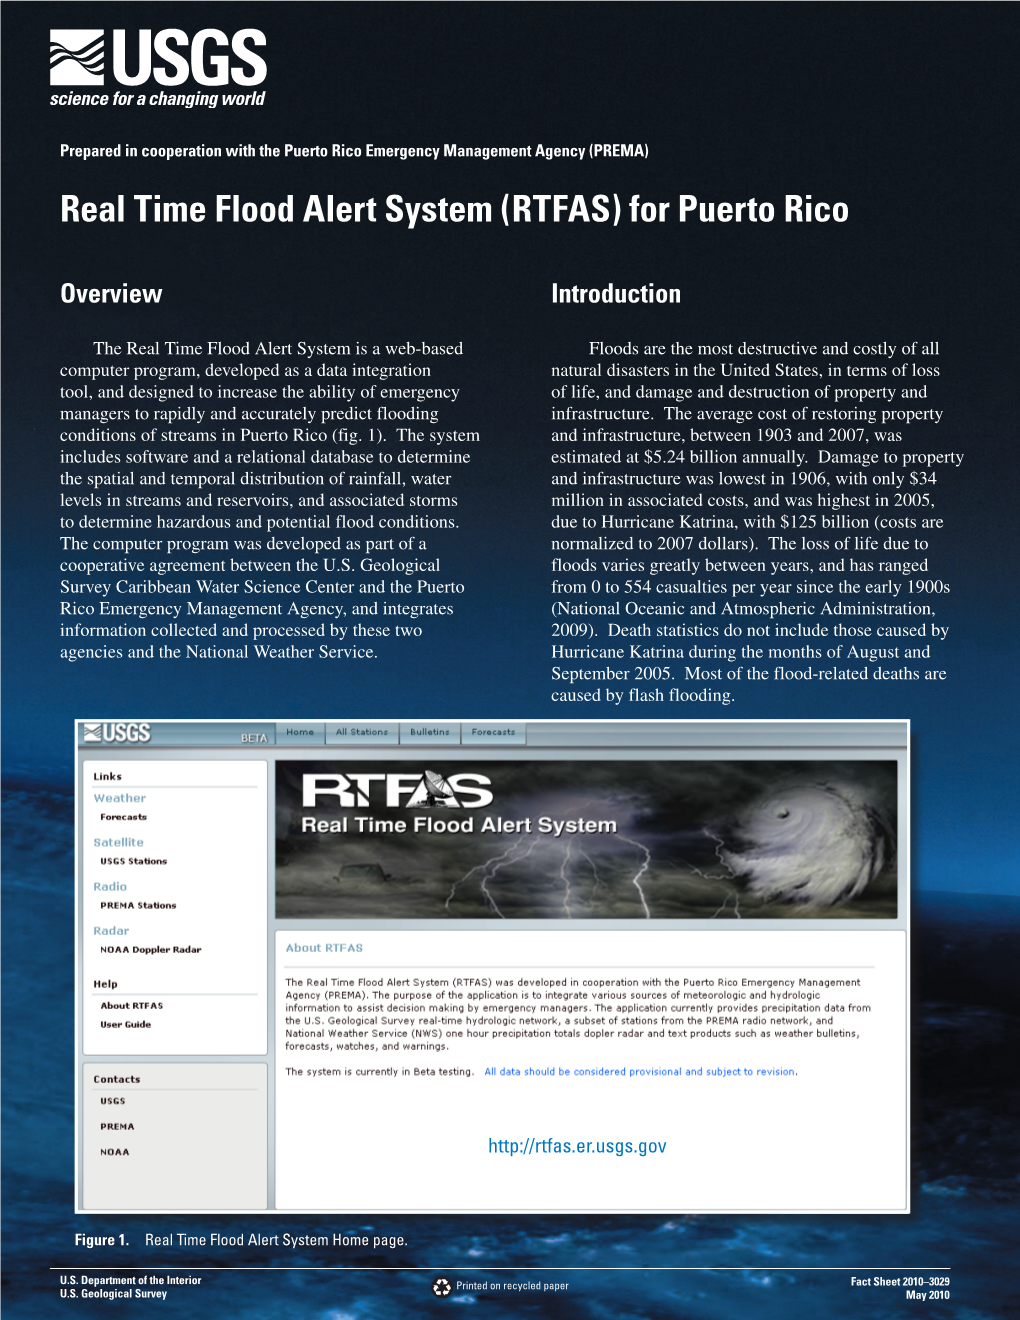 Real Time Flood Alert System (RTFAS) for Puerto Rico